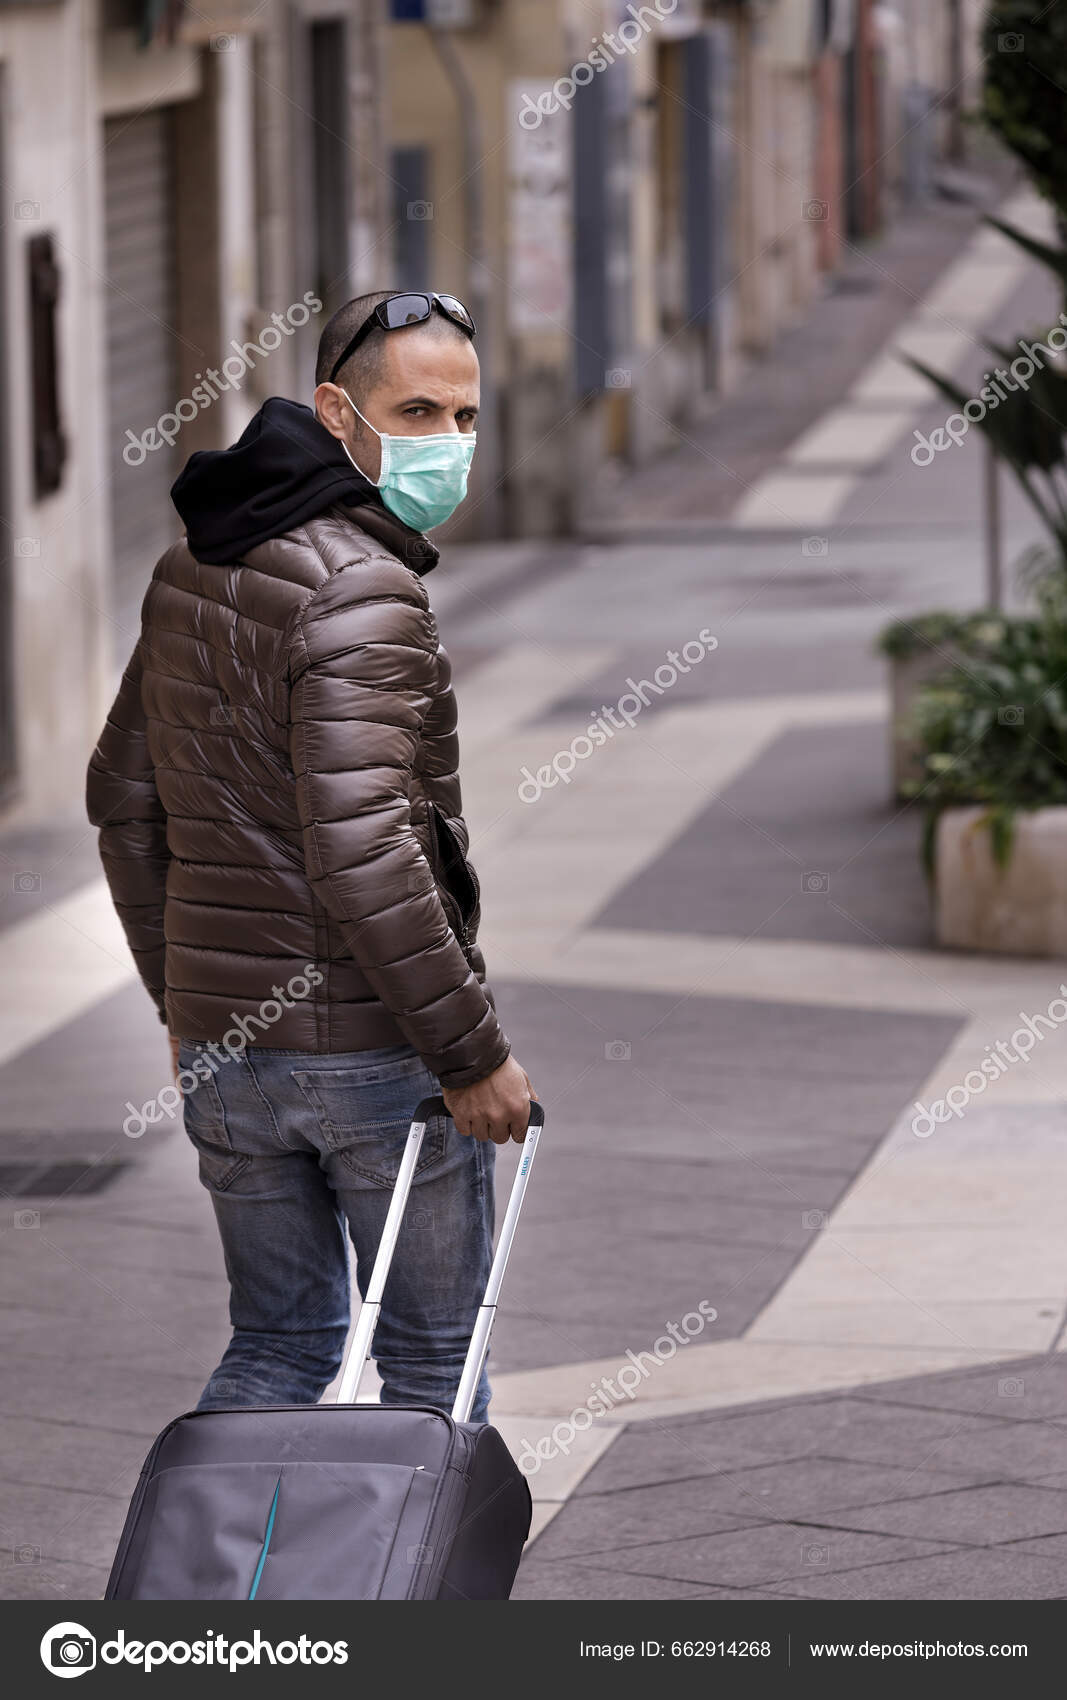 Dark Man Jacket Sunglasses His Head Wears Surgical Protective Mask